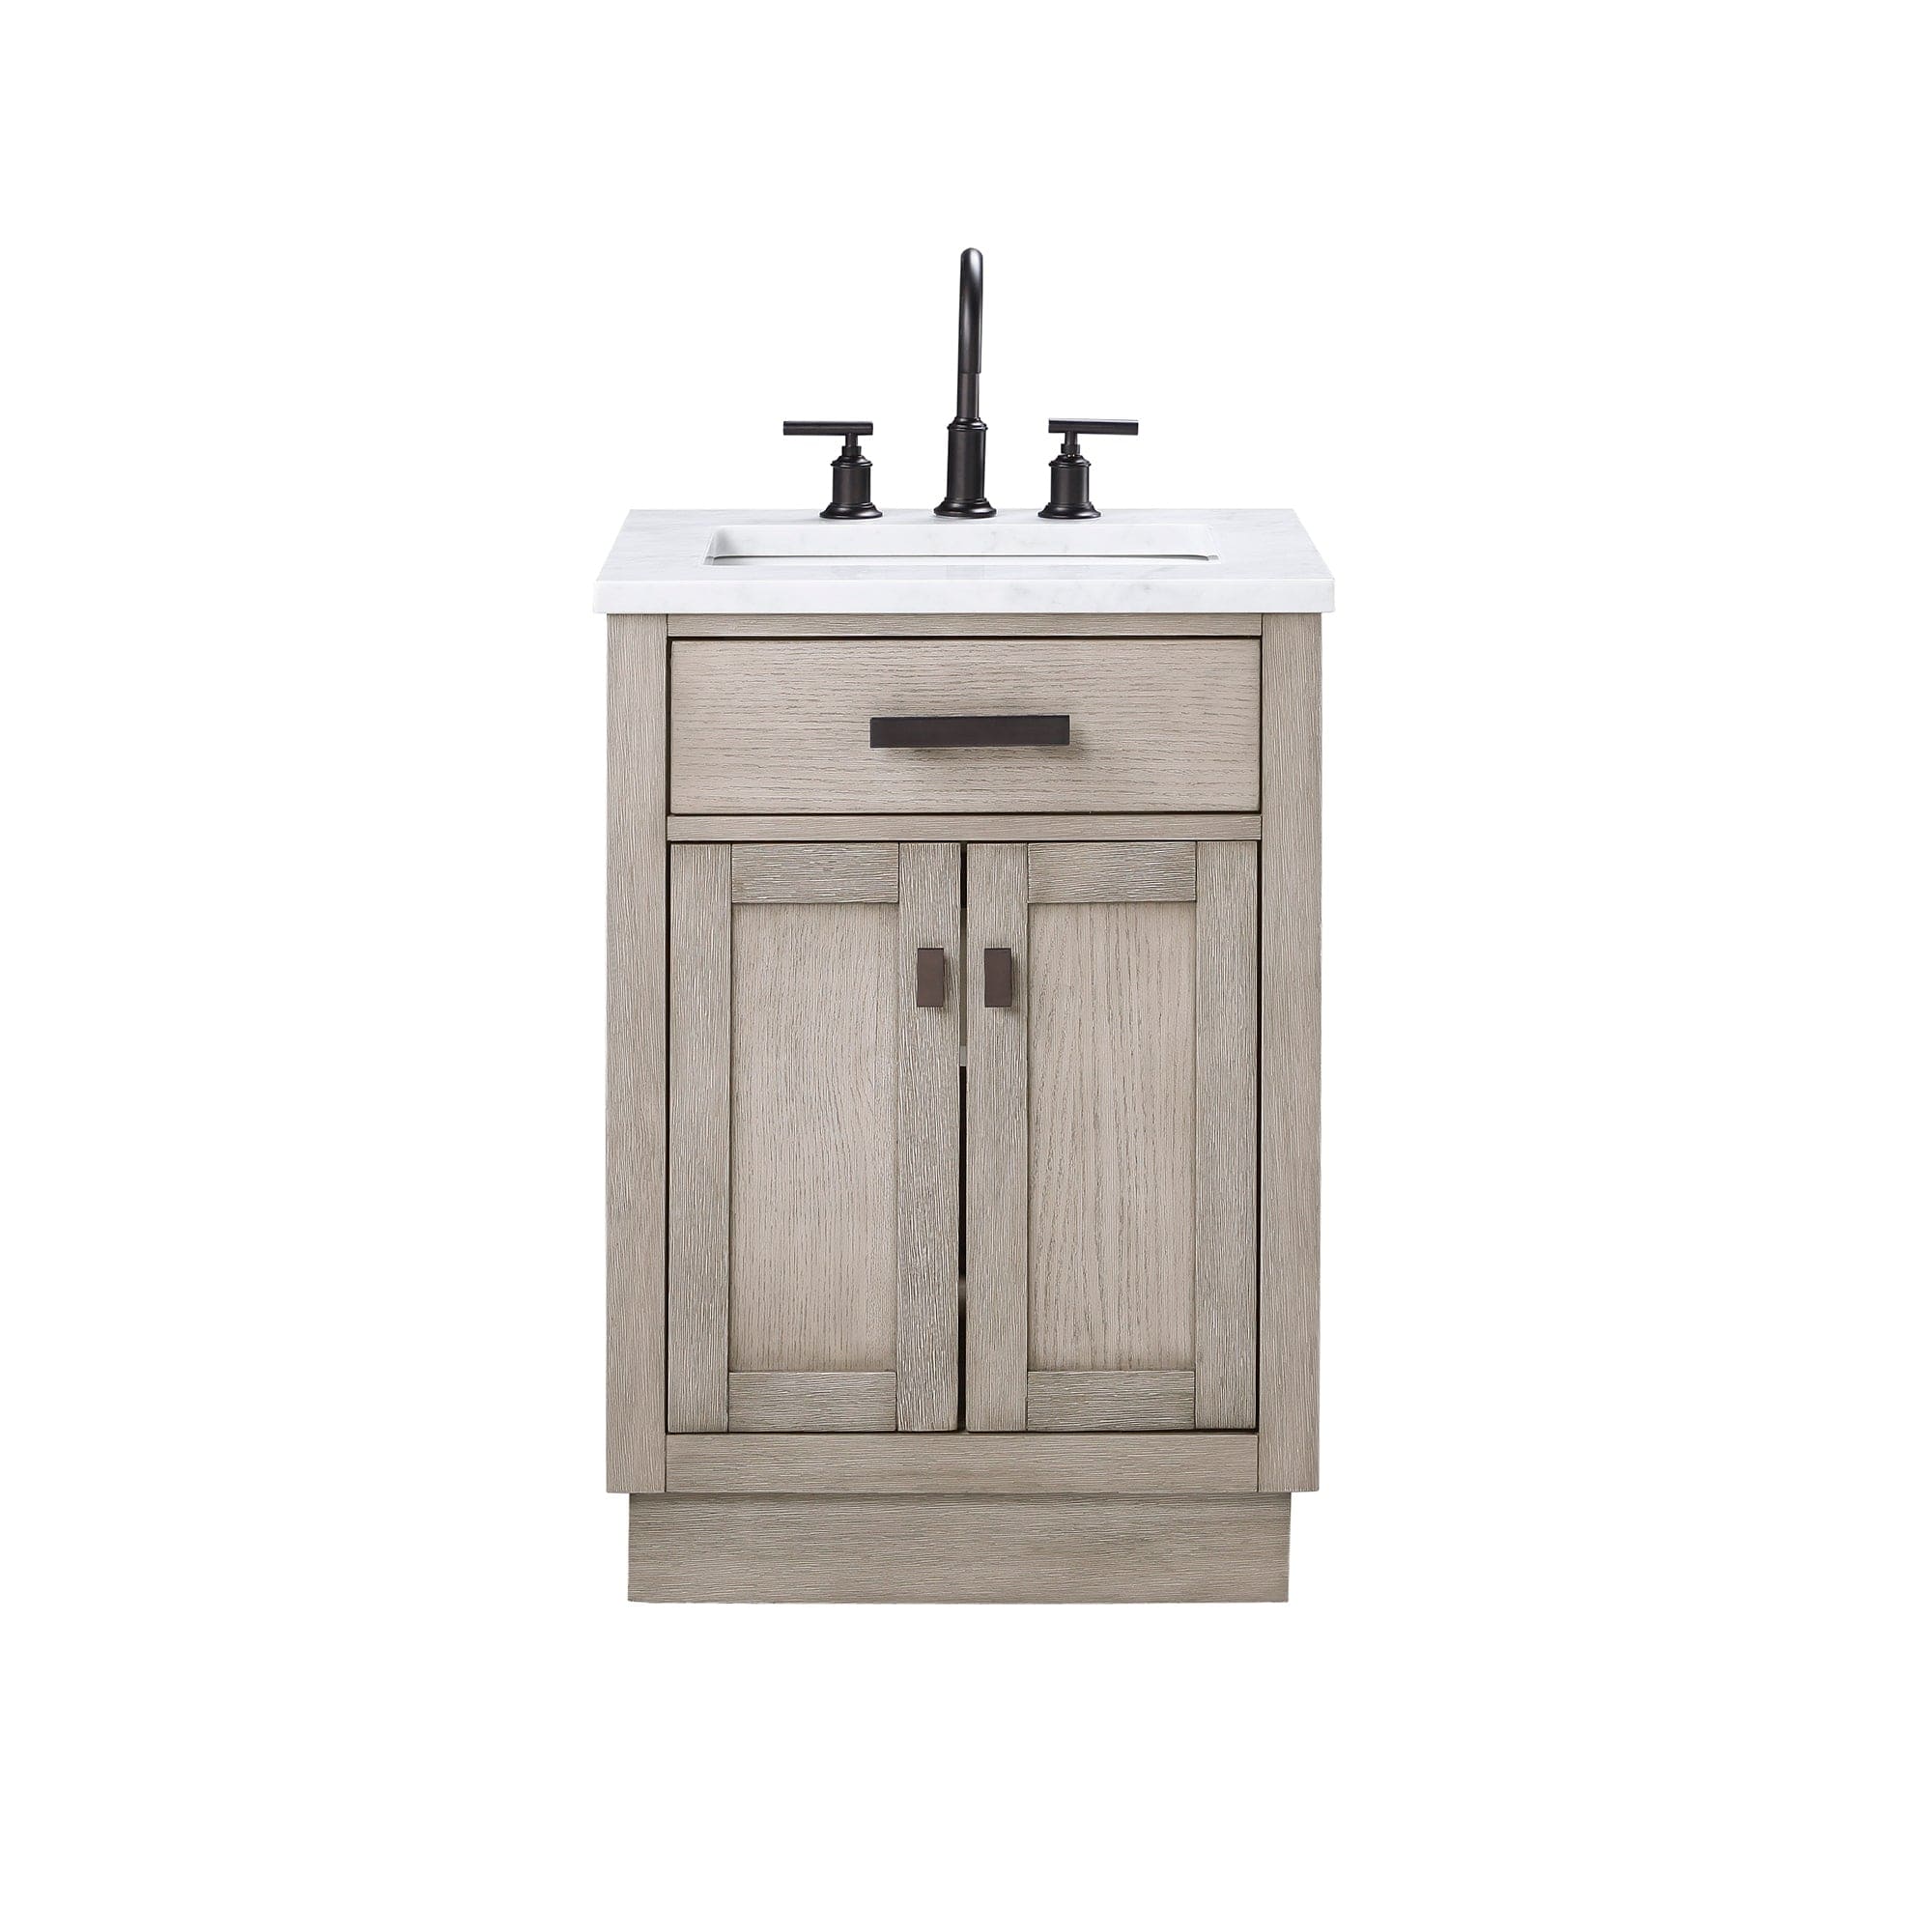 Chestnut 24 In. Single Sink Carrara White Marble Countertop Vanity In Grey Oak with Grooseneck Faucet and Mirror - Molaix732030764590CH24CW03GK-R21BL1403